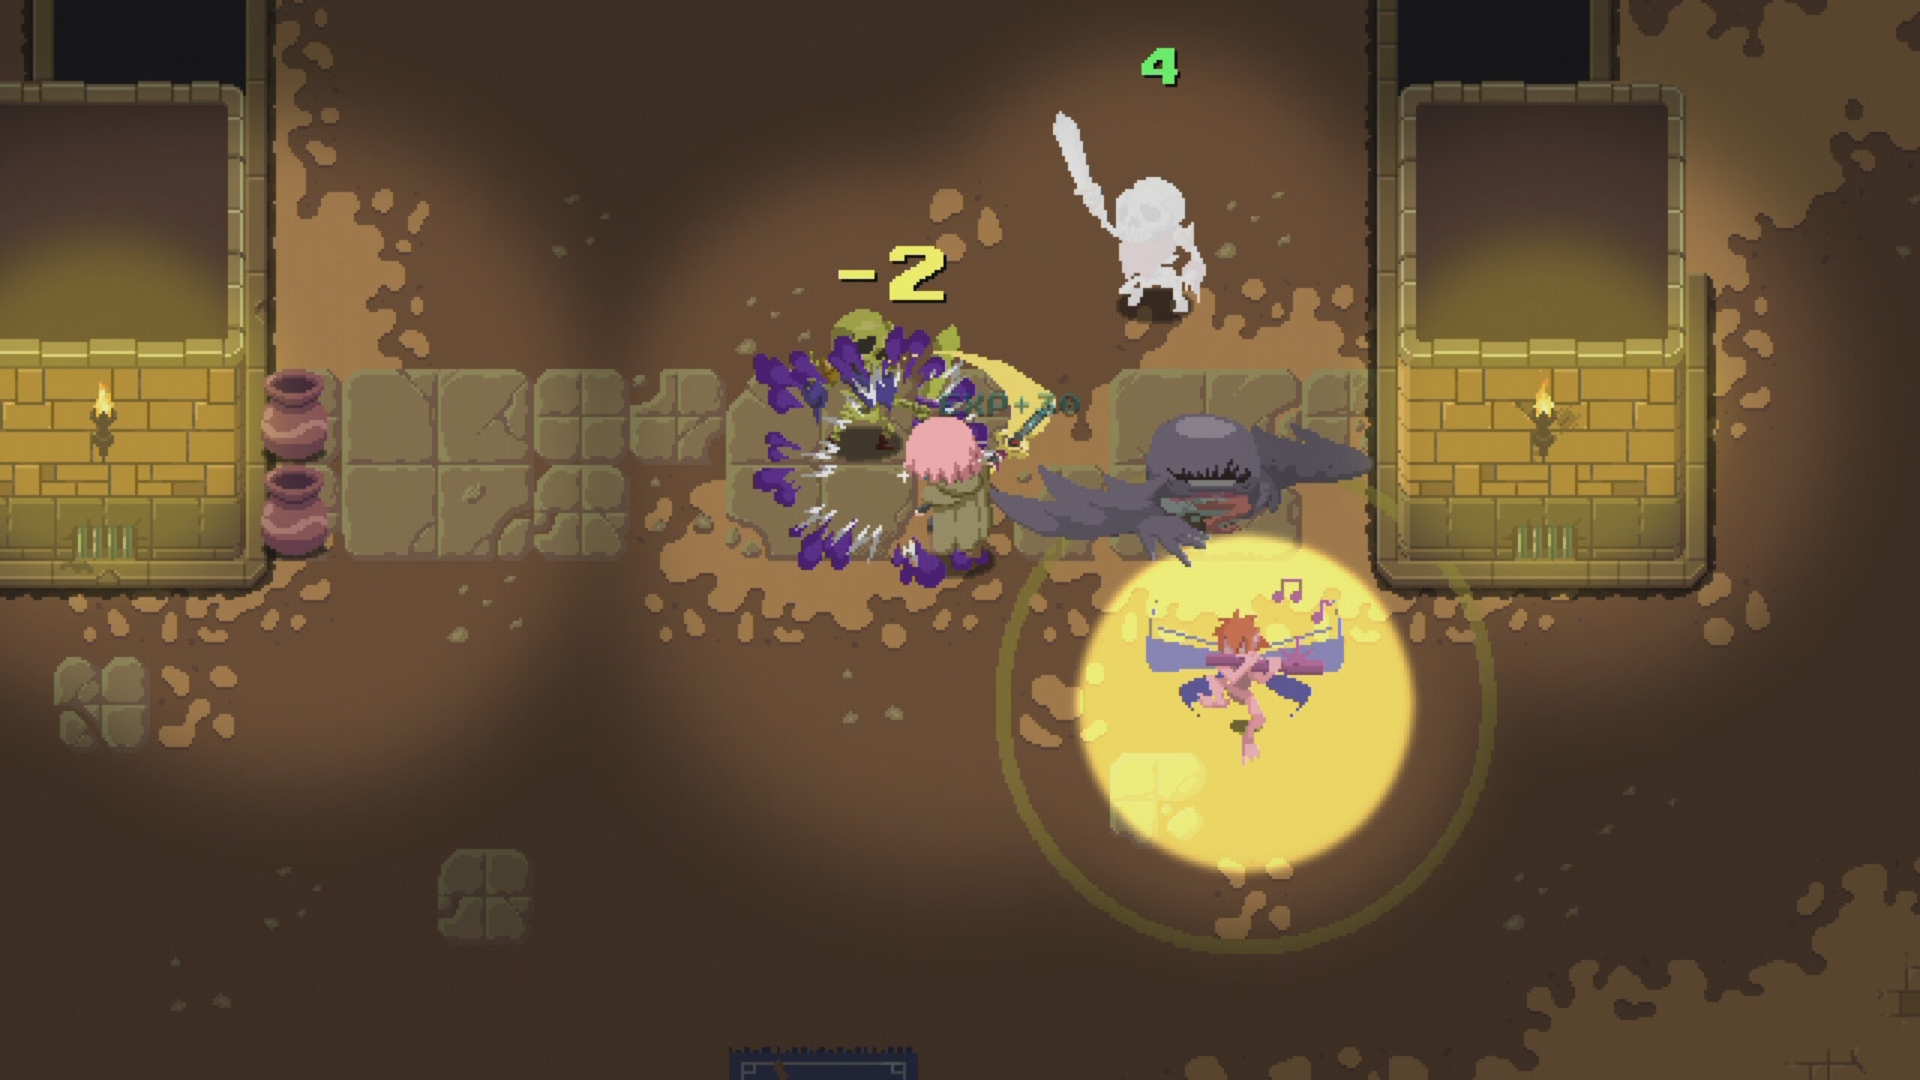 Indie game, roguelike, Sword of the Necromancer. A screenshot shows the protagonist fighting skeletons in a dungeon.